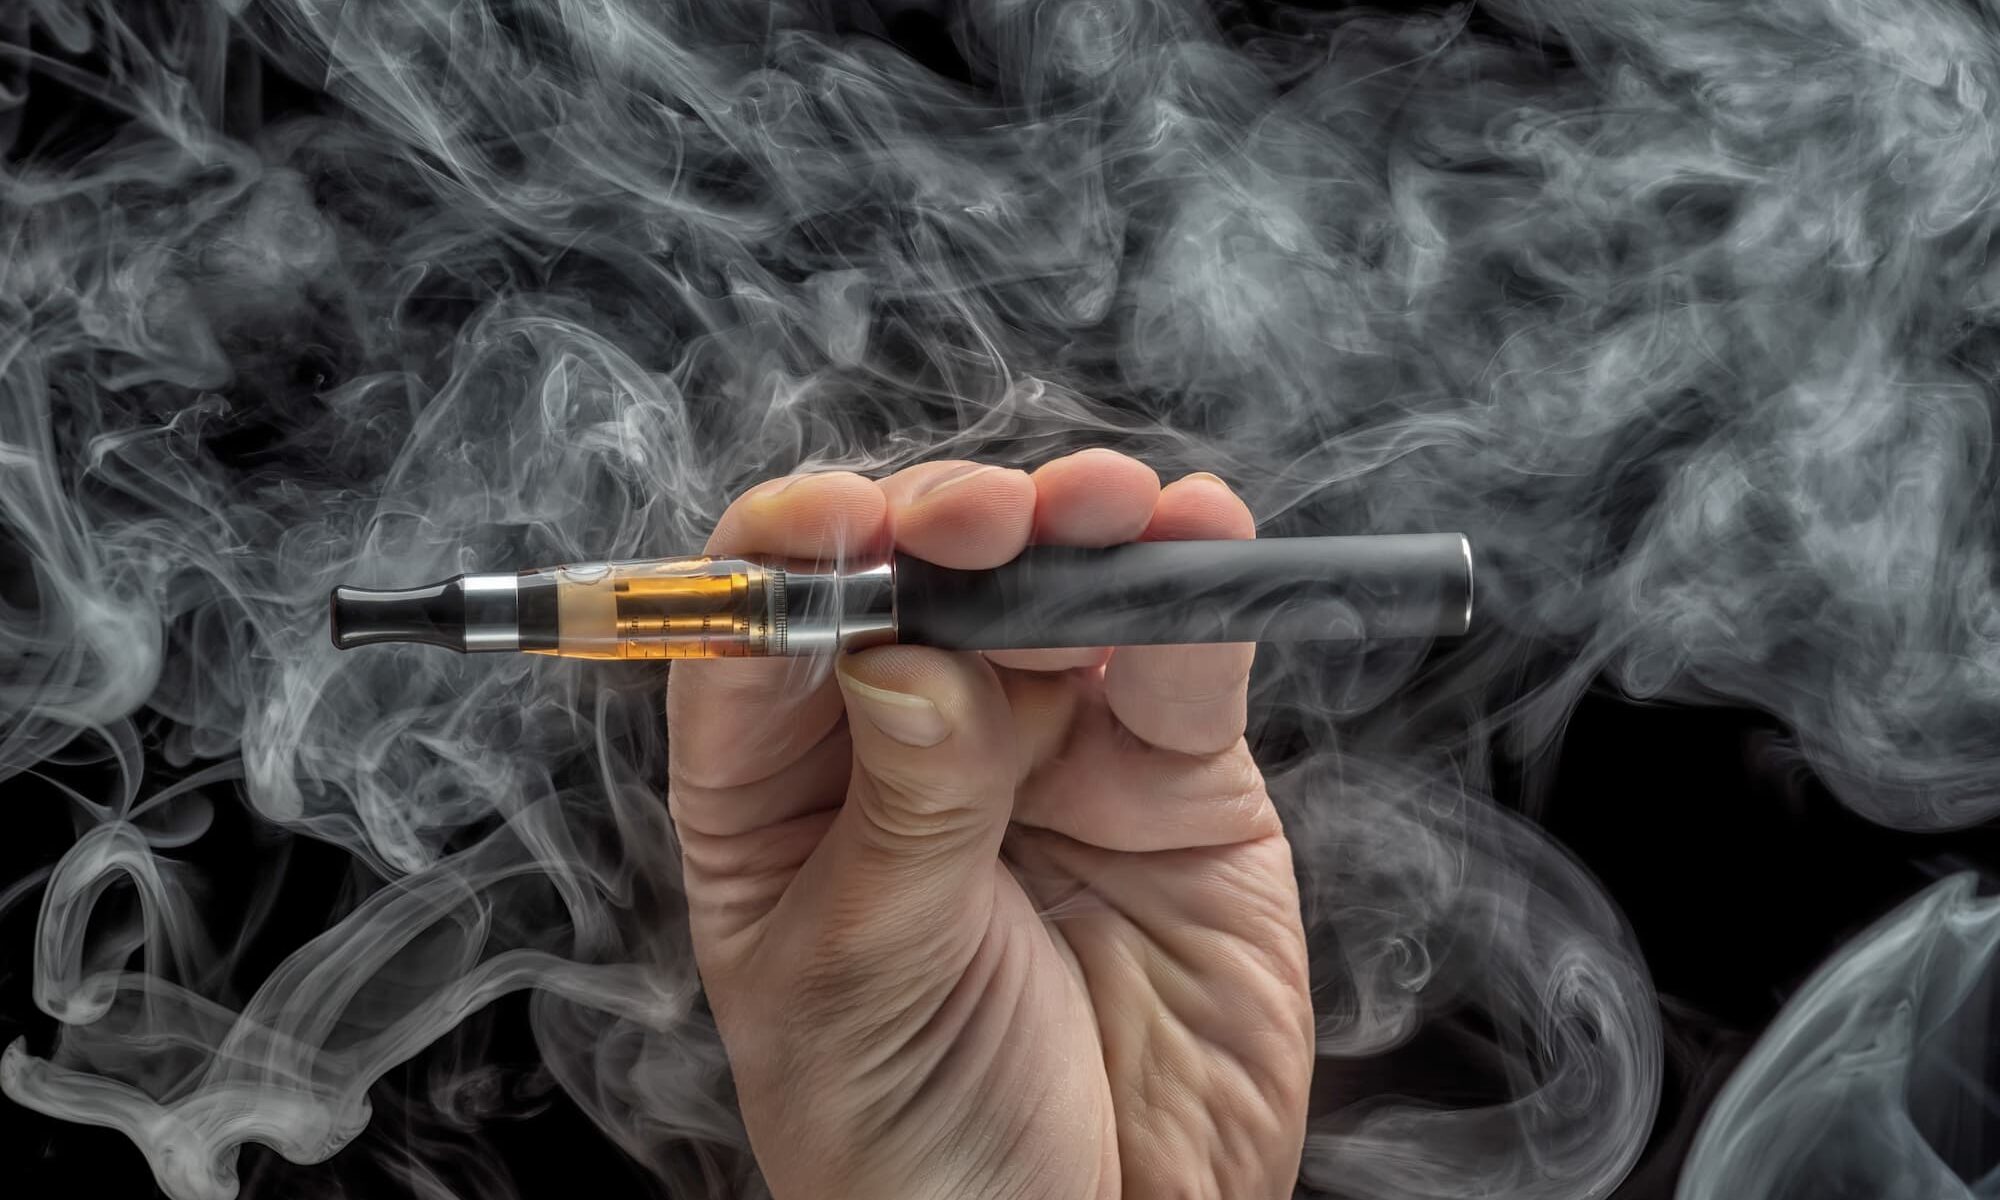 A close up image of a hand holding a vape pen with clouds of smoke in the background